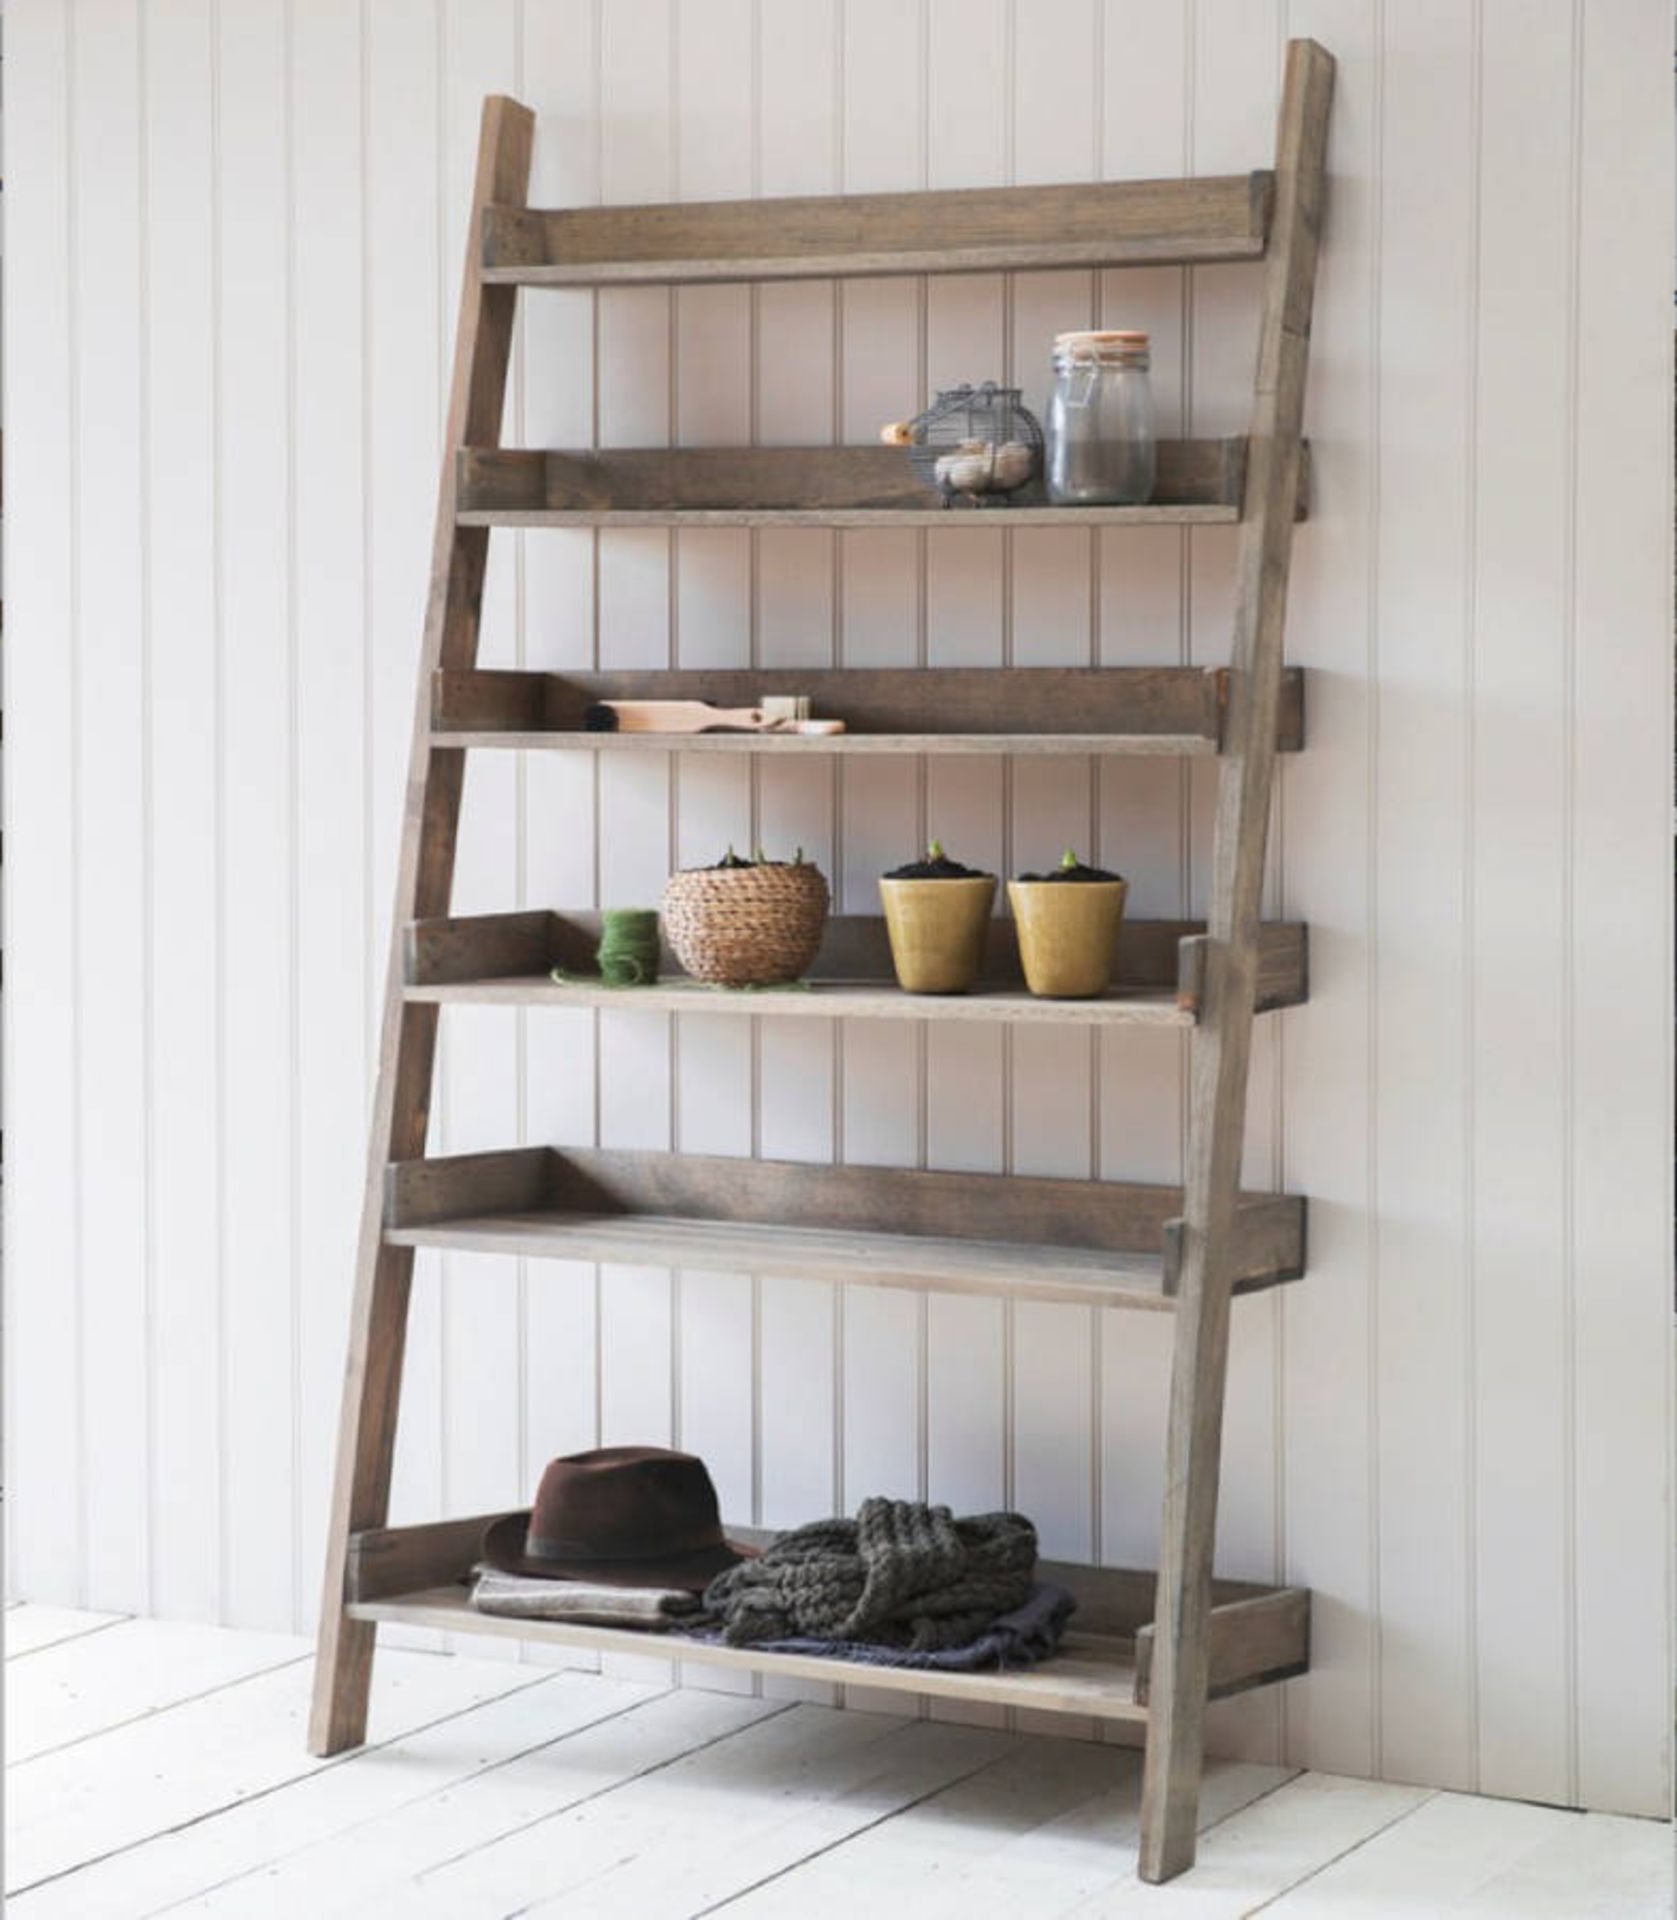 Five Shelf Ladder Display Black Create an inspired space As an alternative to a traditional